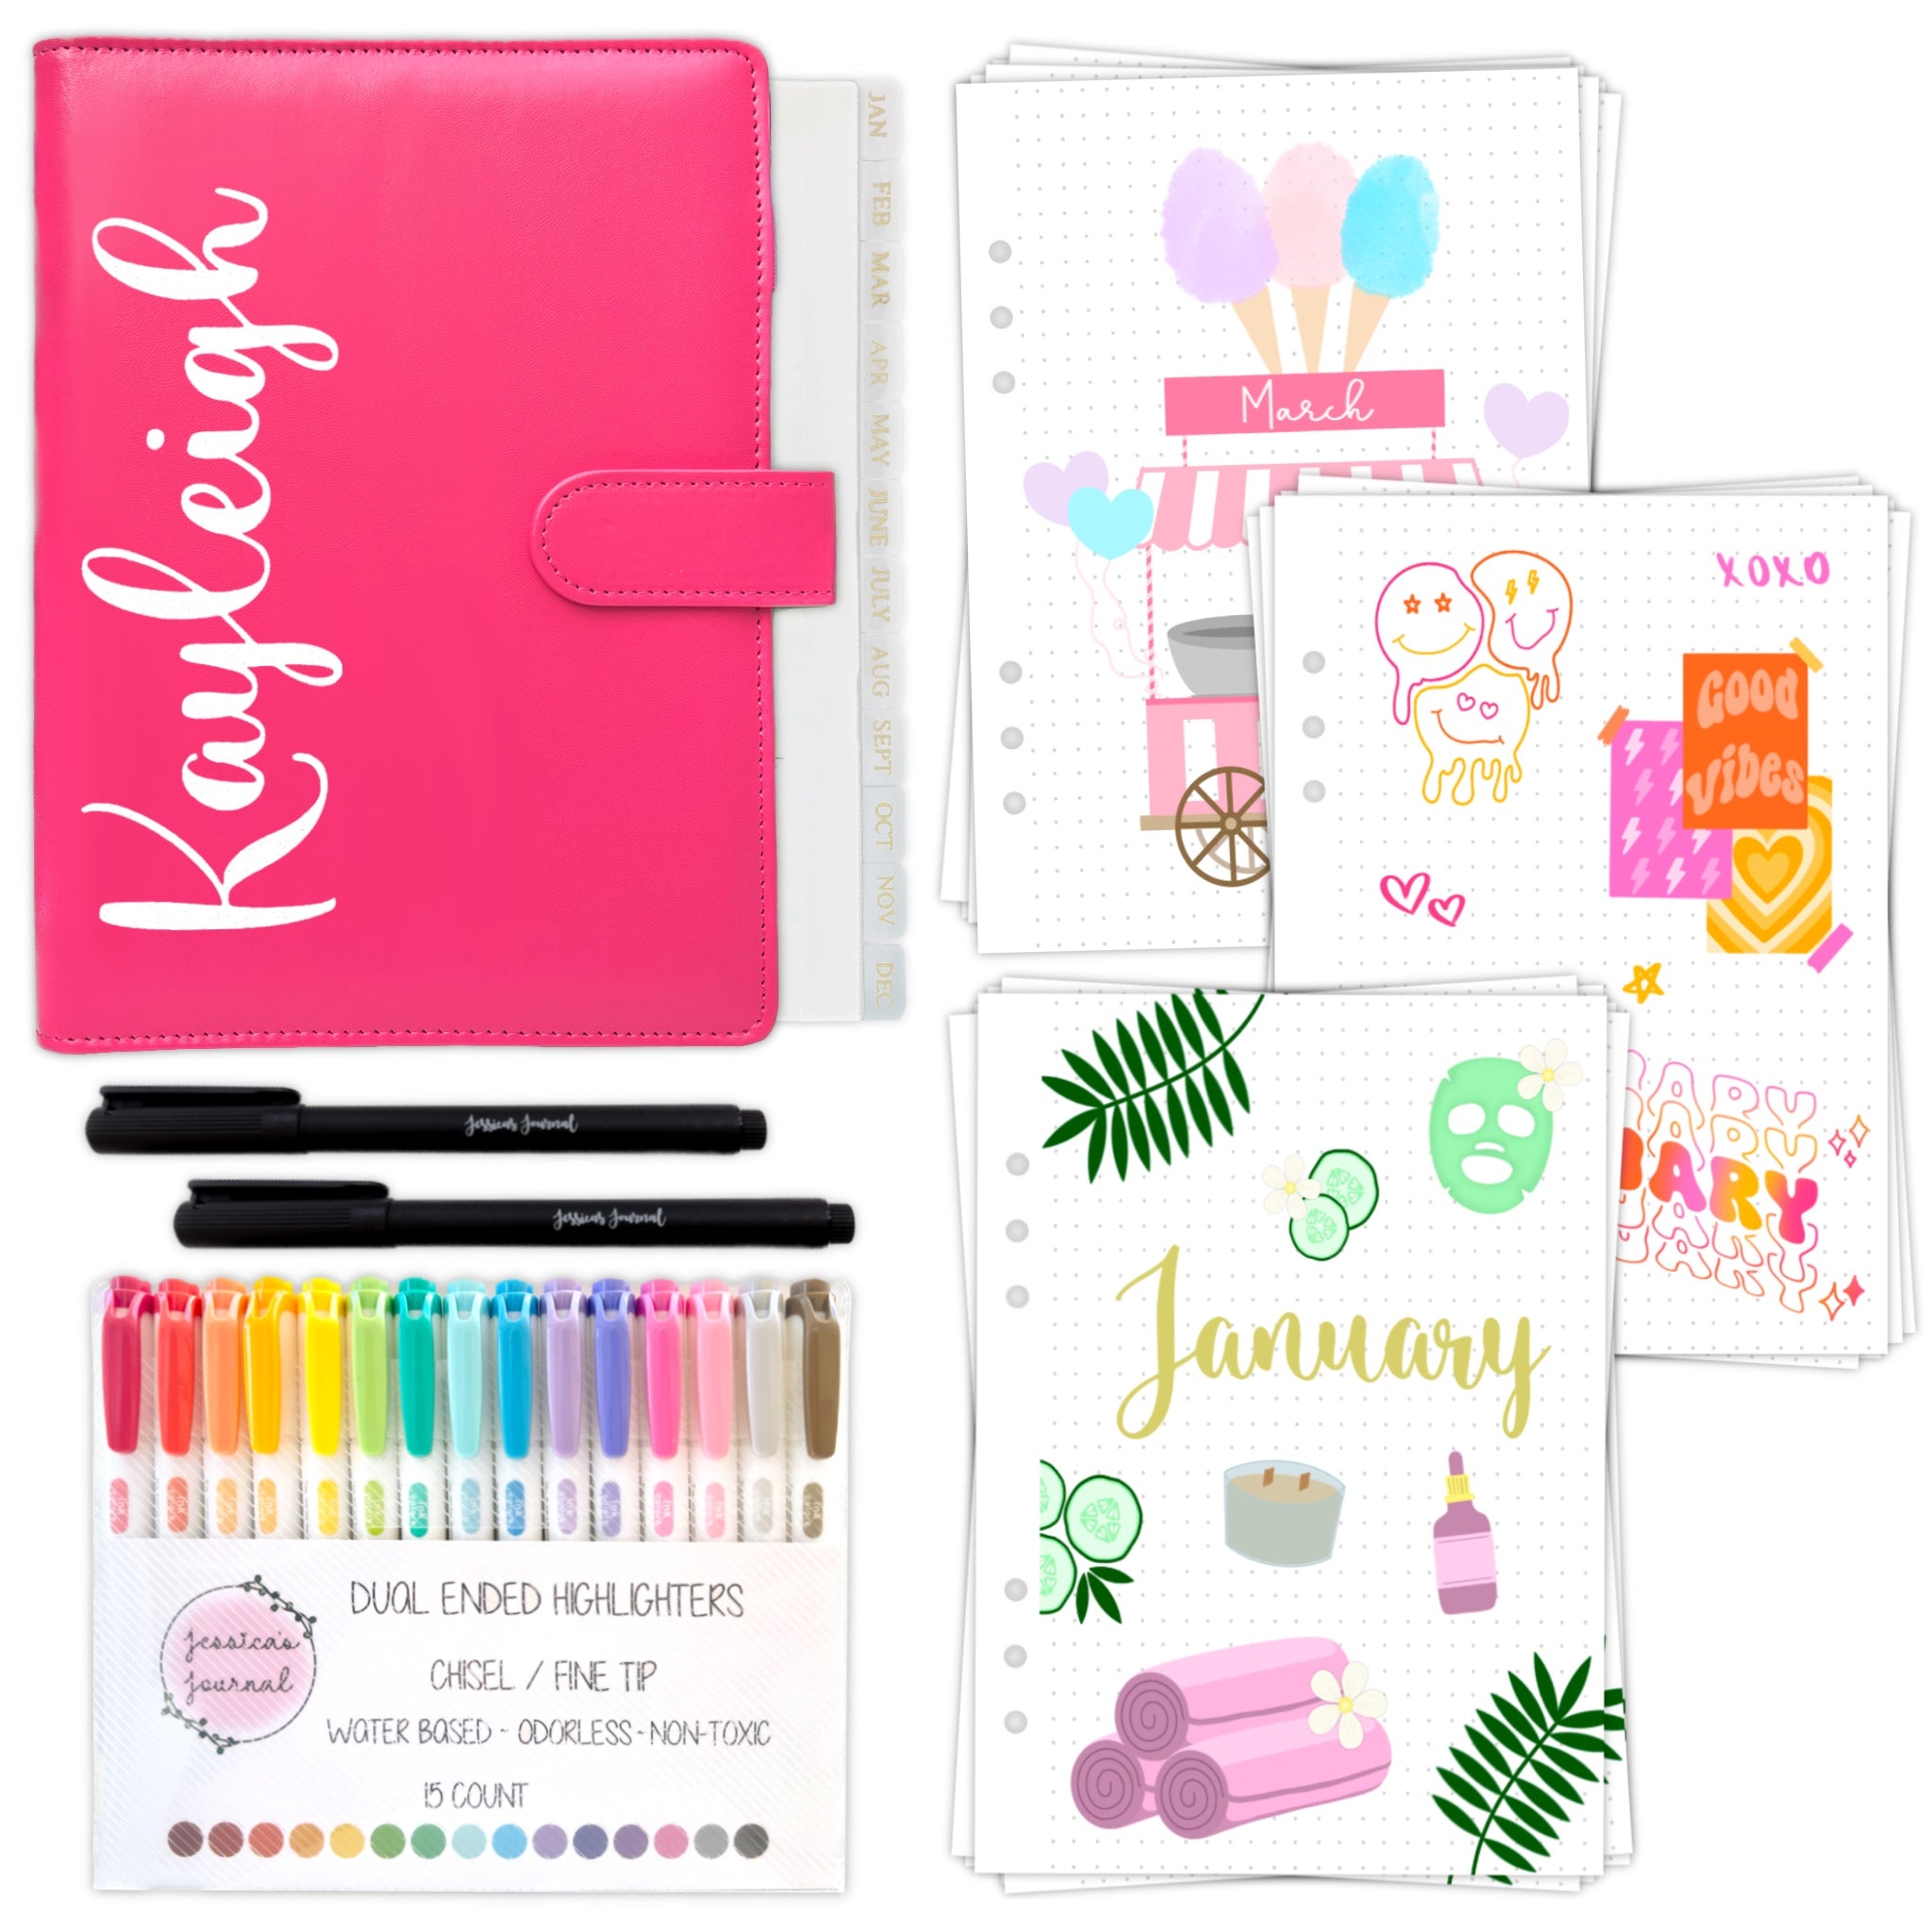 Let's Skate - Journaling Kit (Hair and Skin Options) - Fabulously Planned